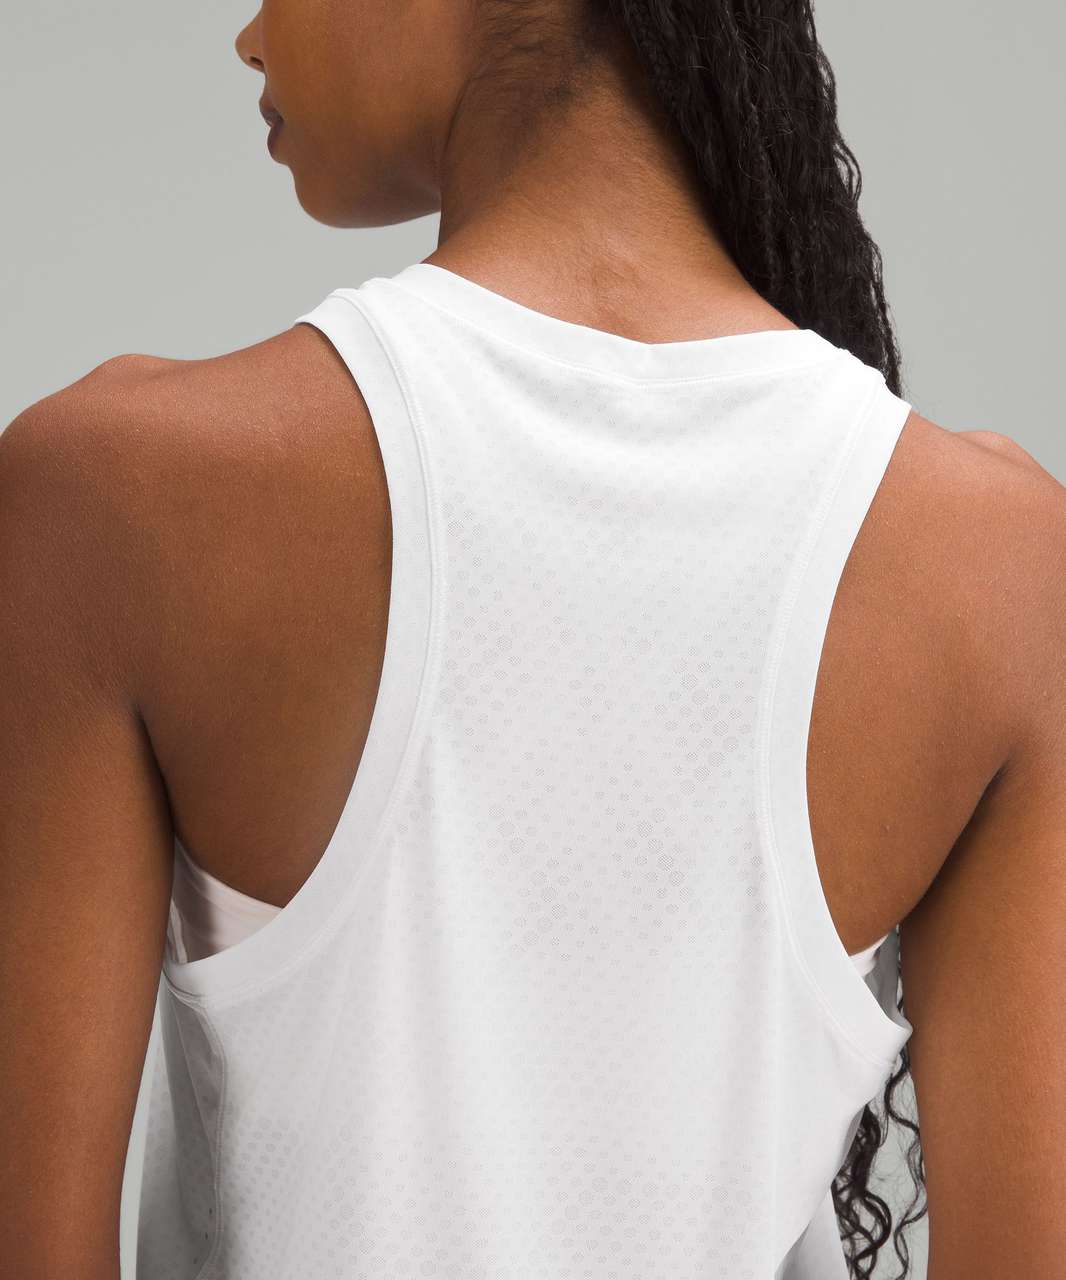 Lululemon Fast and Free Race Length Tank Top - White